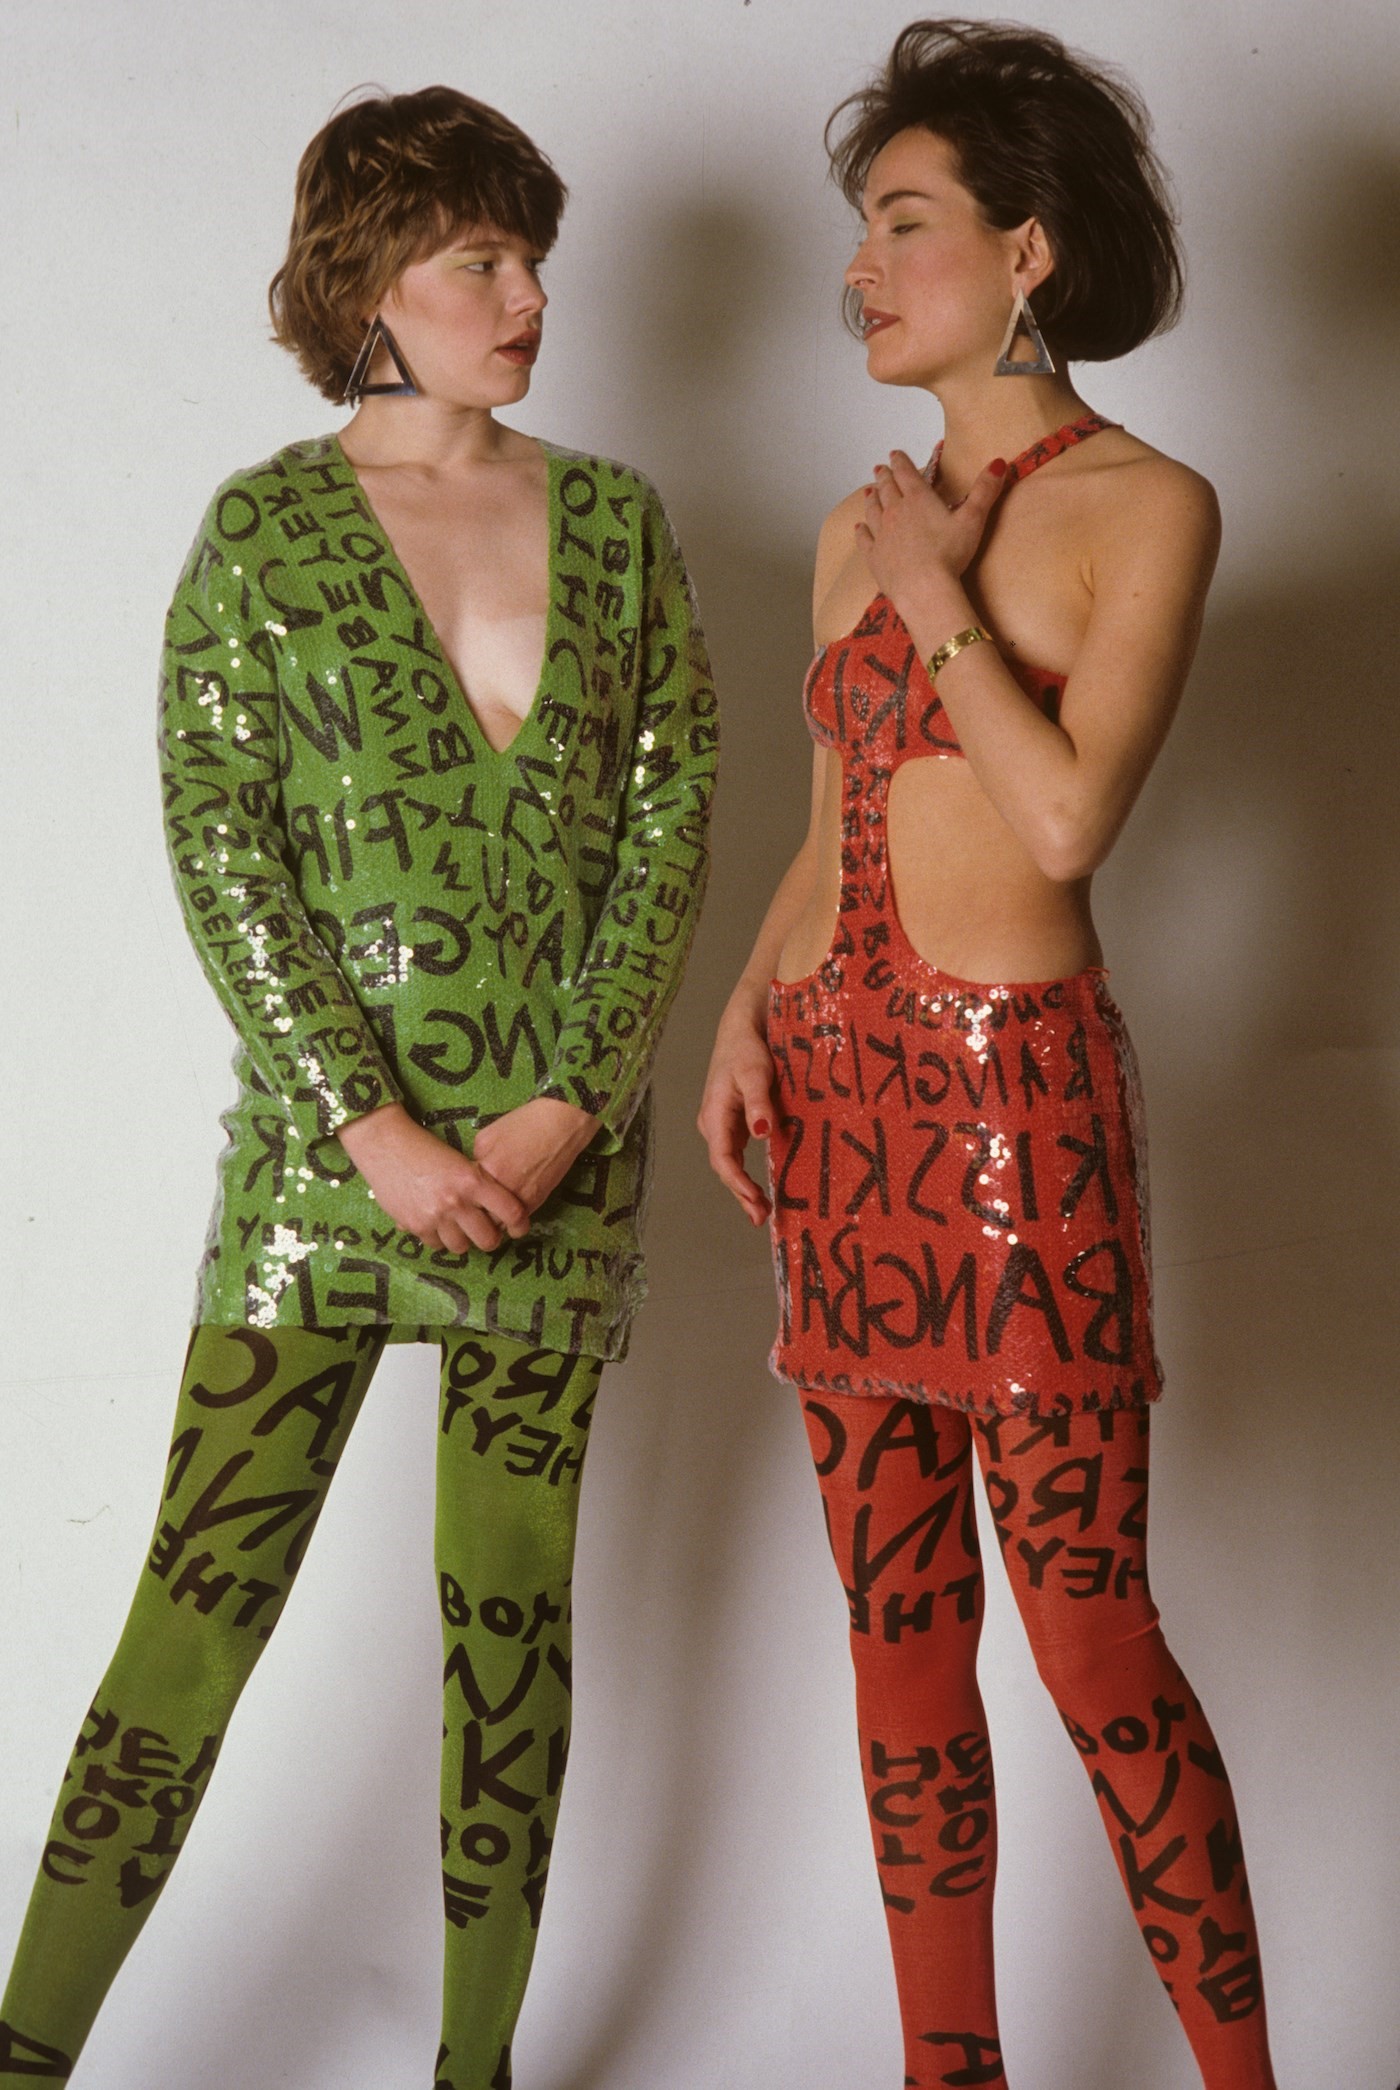 1984. Stephen Sprouse. Two models in similar lette